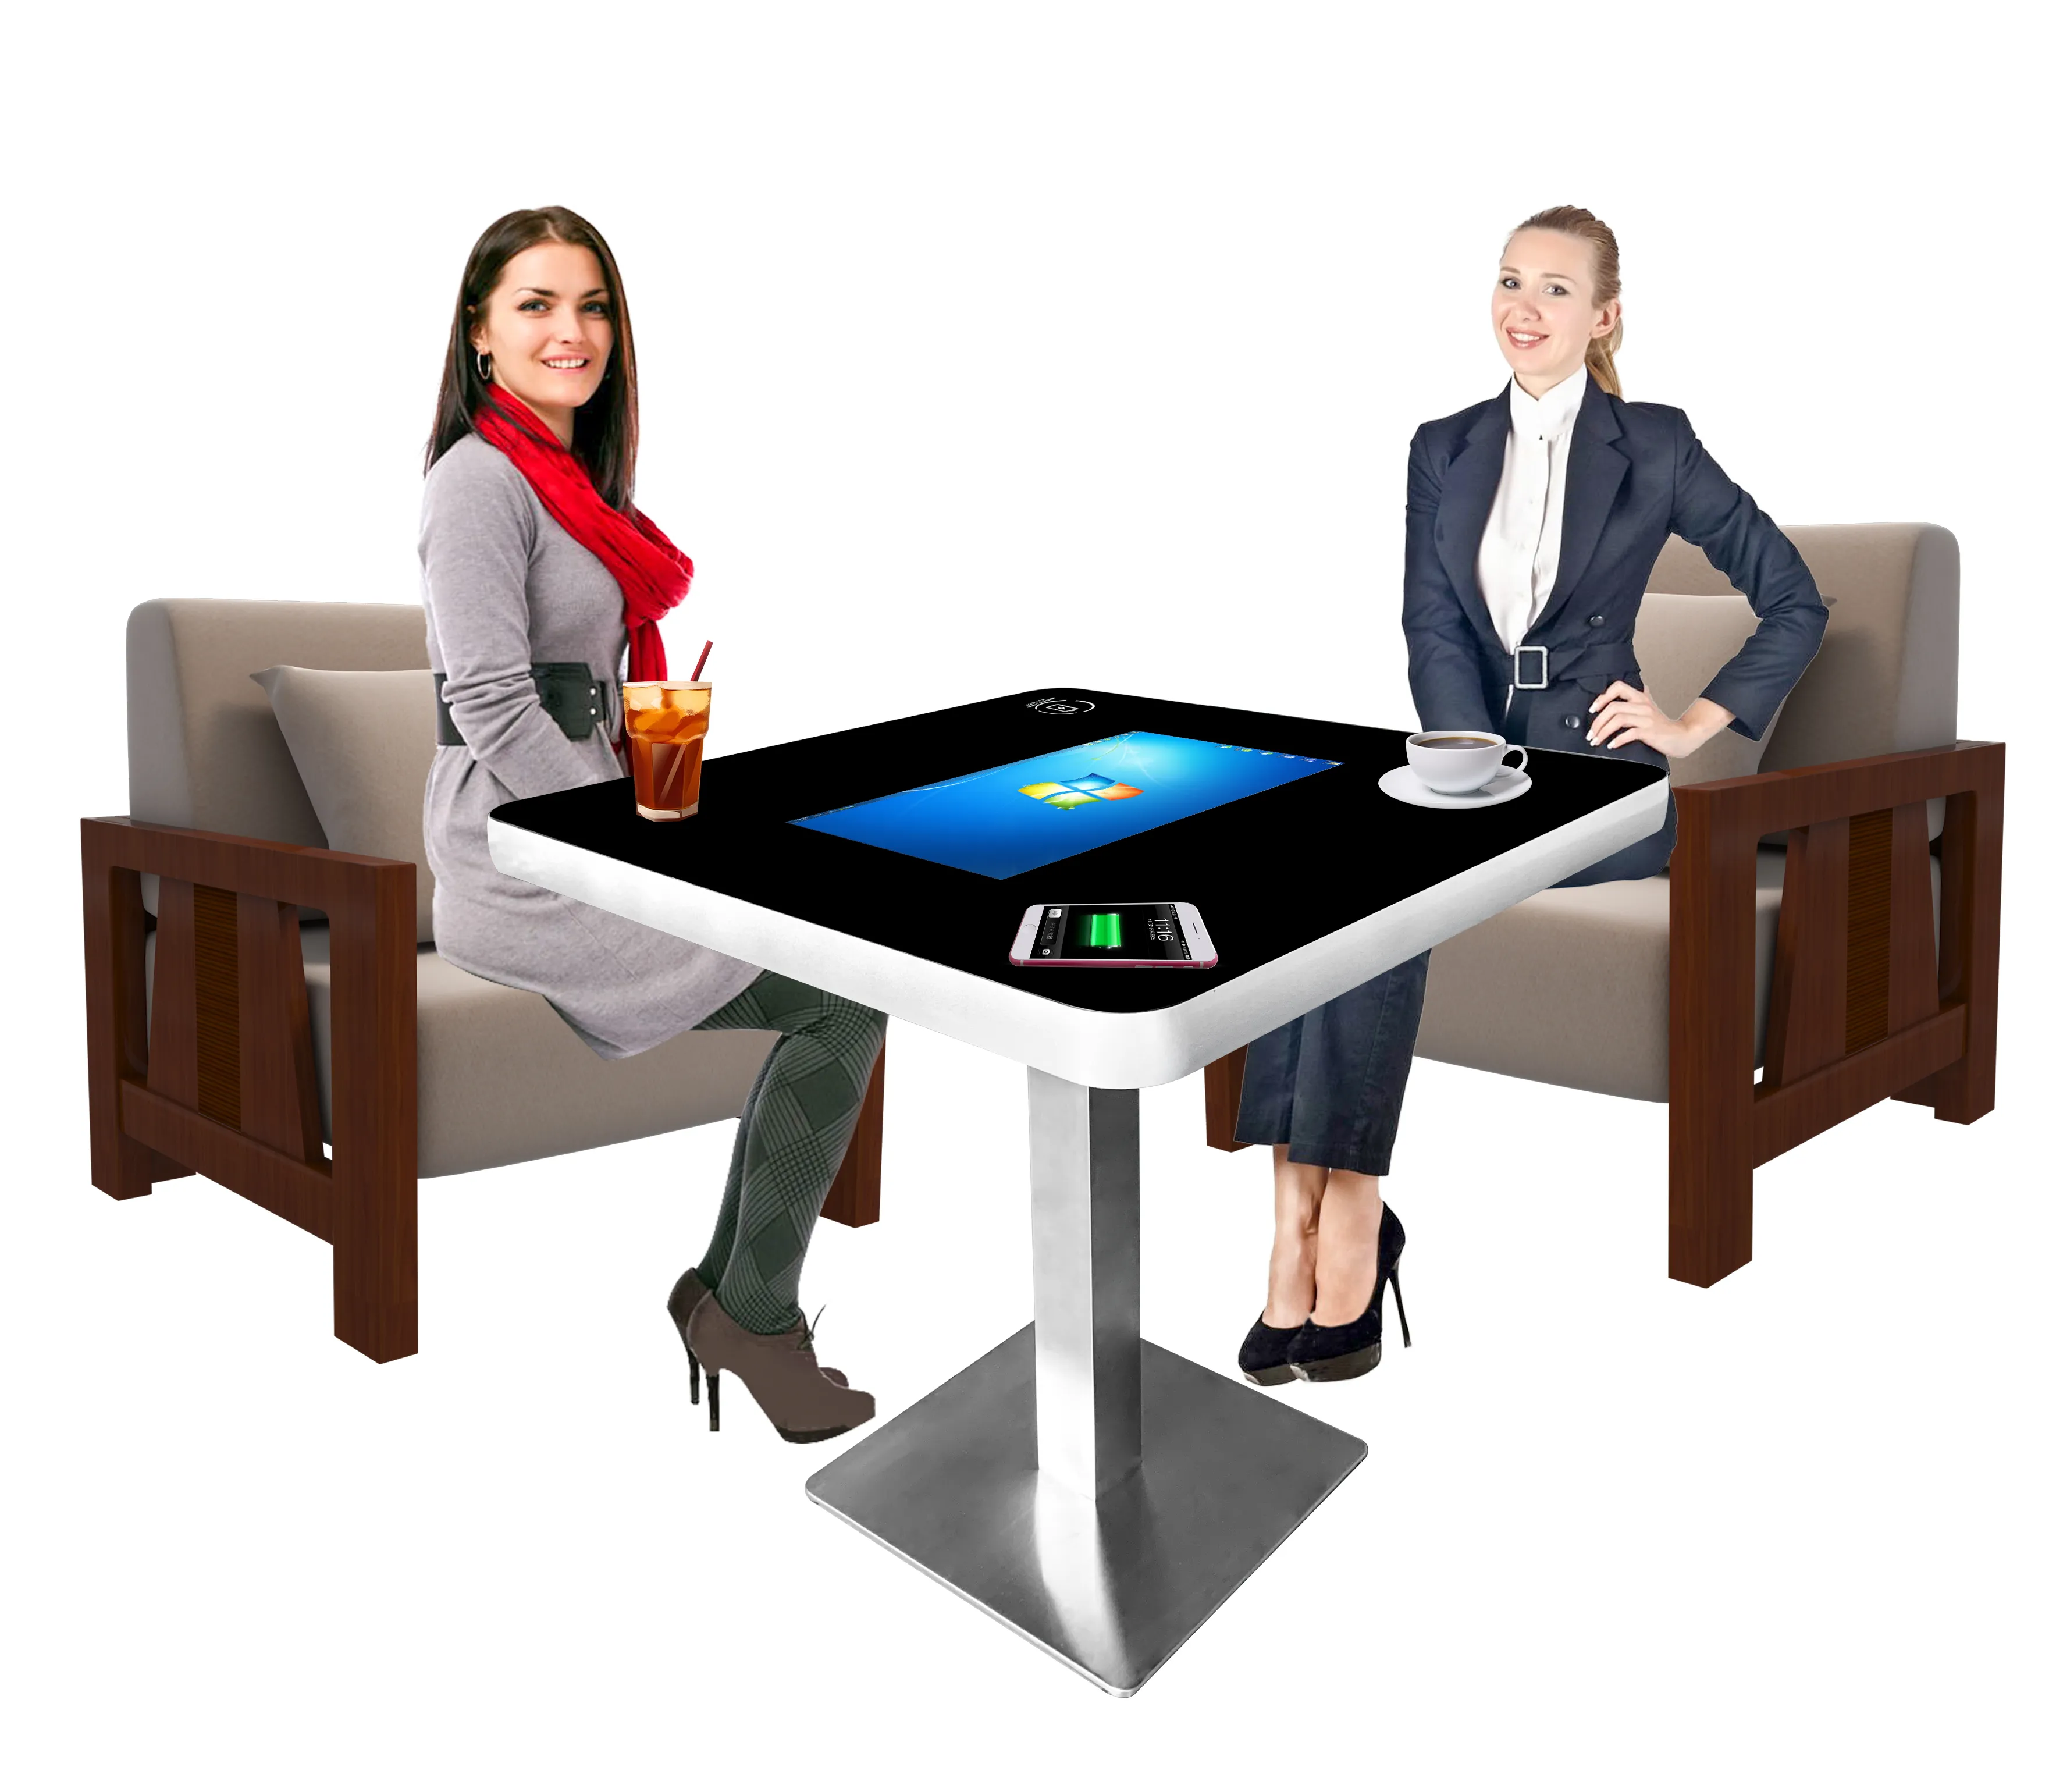 Touch table Wifi android system LCD table kiosk interactive multi top coffee smart touch screen table for kids game info show